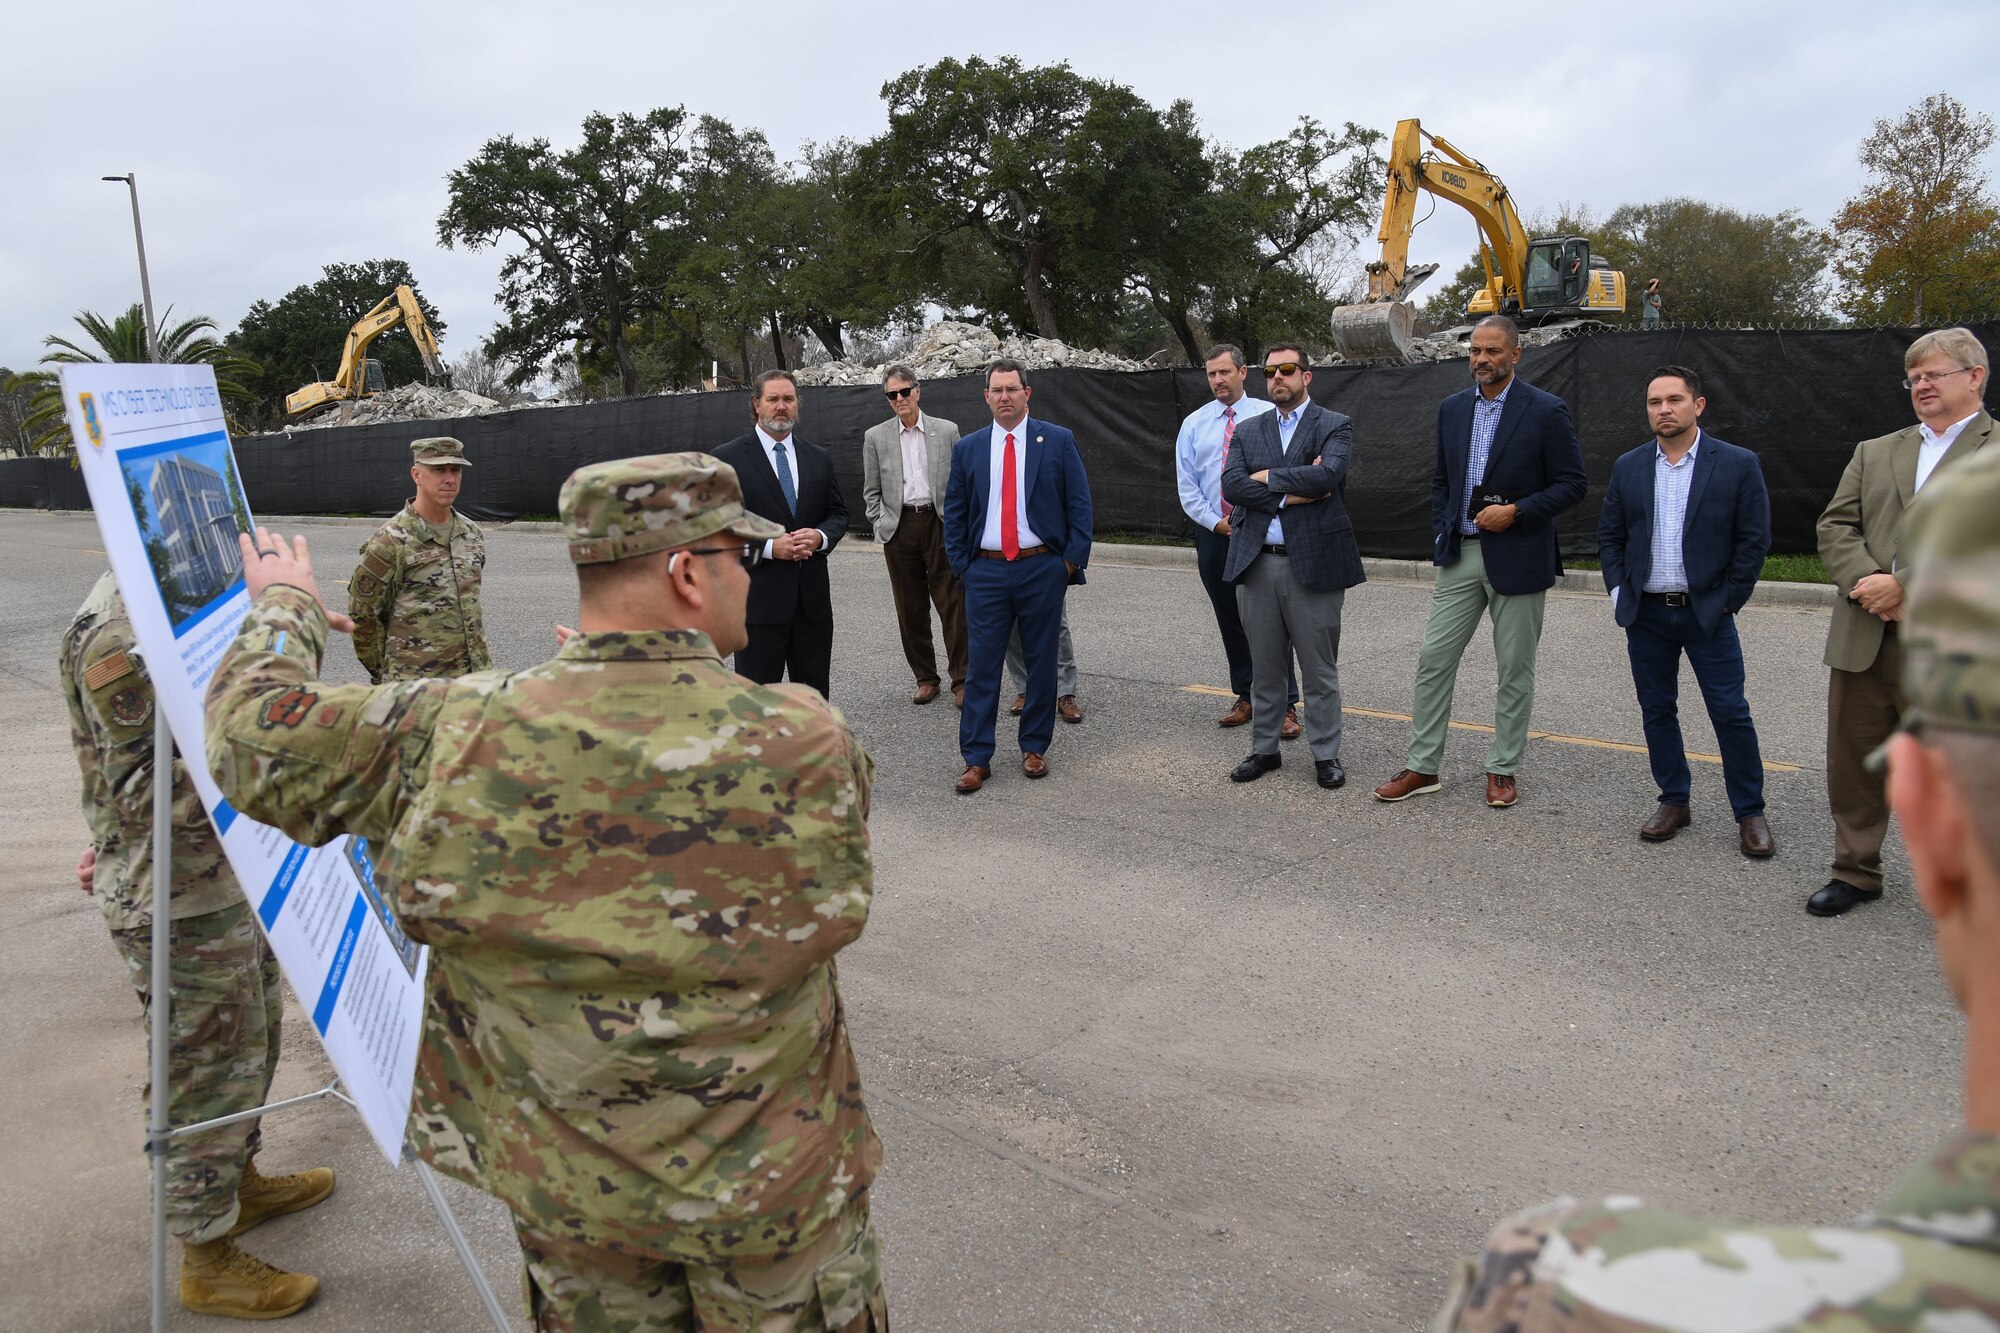 U.S. Air Force Lt. Col. James Roberts, 81st Training Group deputy commander, briefs state and local civic leaders on the new Mississippi Cyber Center construction project during A Day At Keesler at Keesler Air Force Base, Mississippi, Dec. 9, 2022.